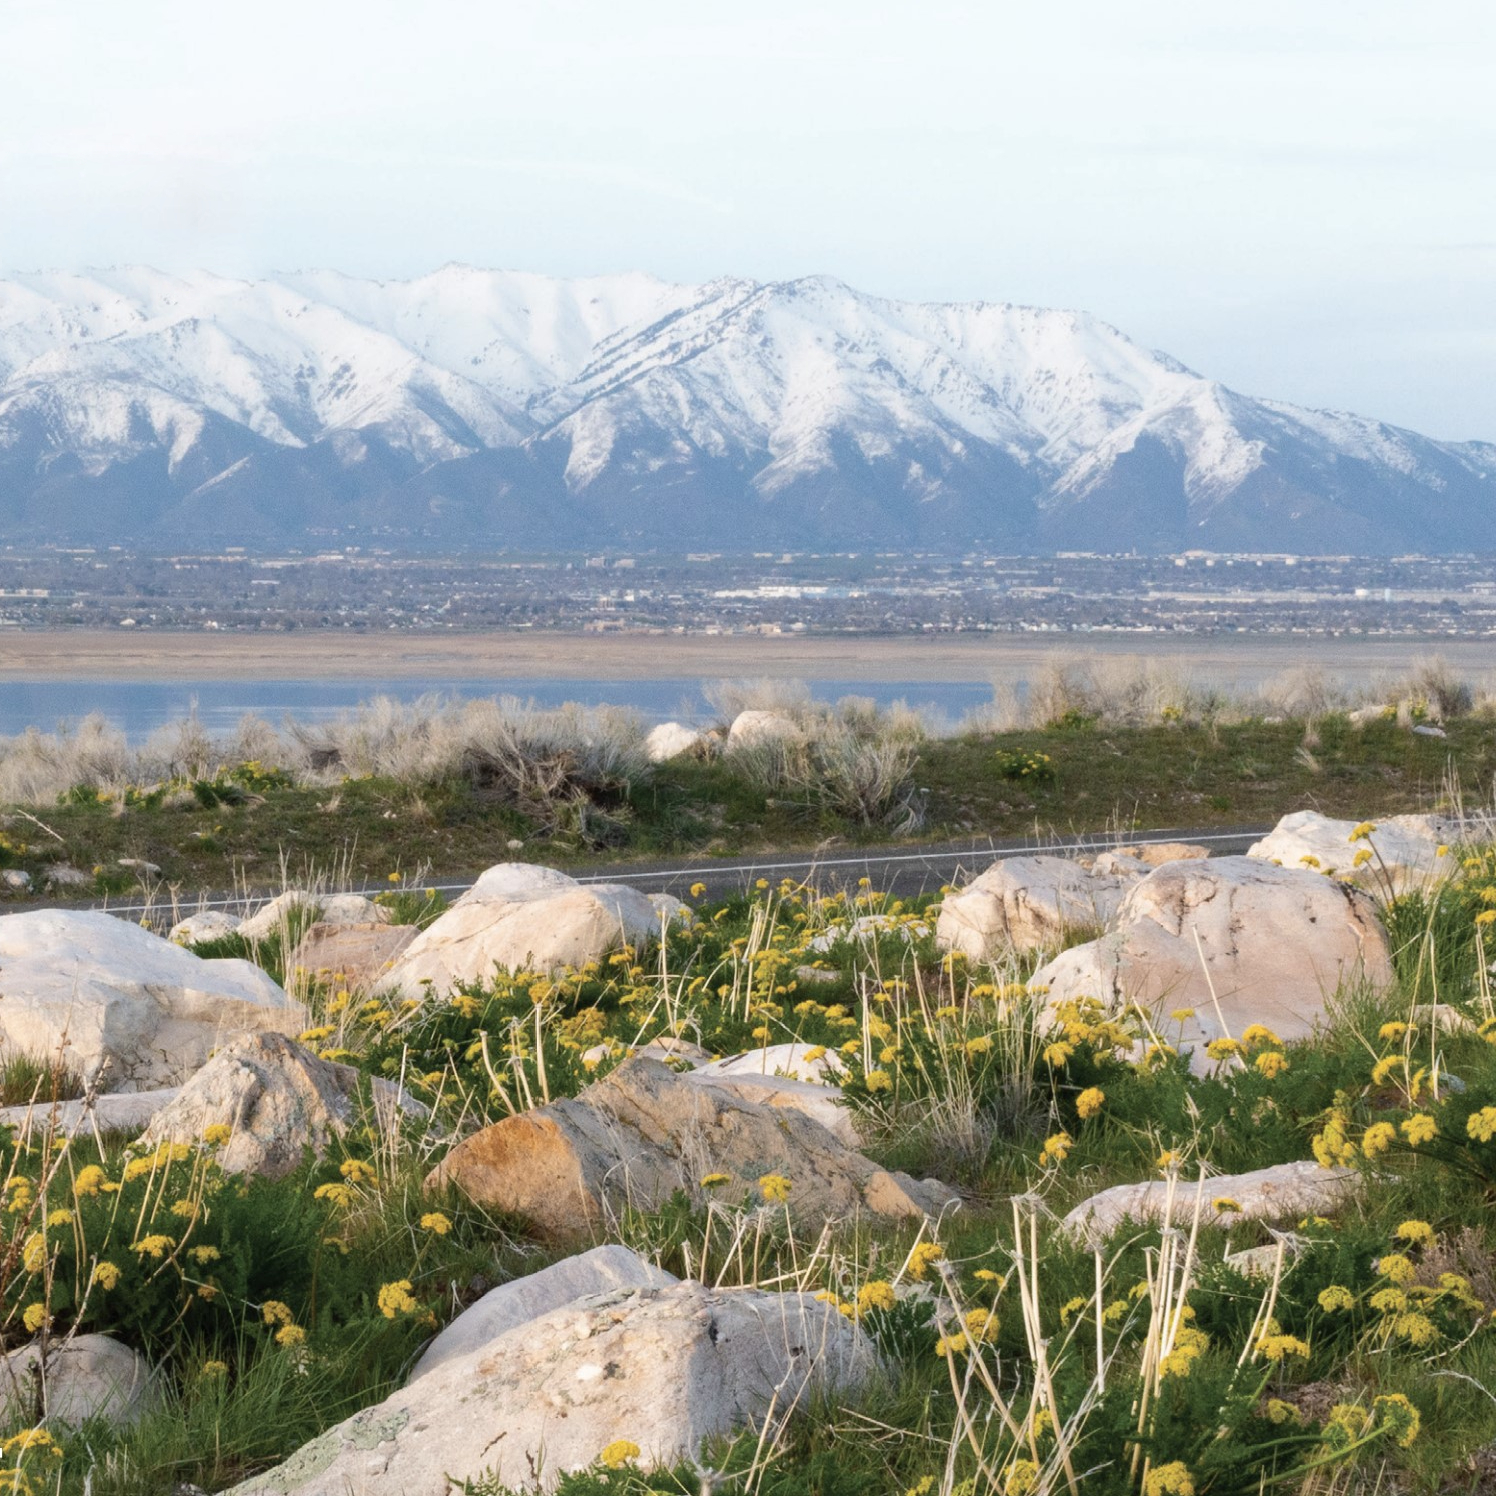 Wasatch Mountain Range from Antelope Island State Park